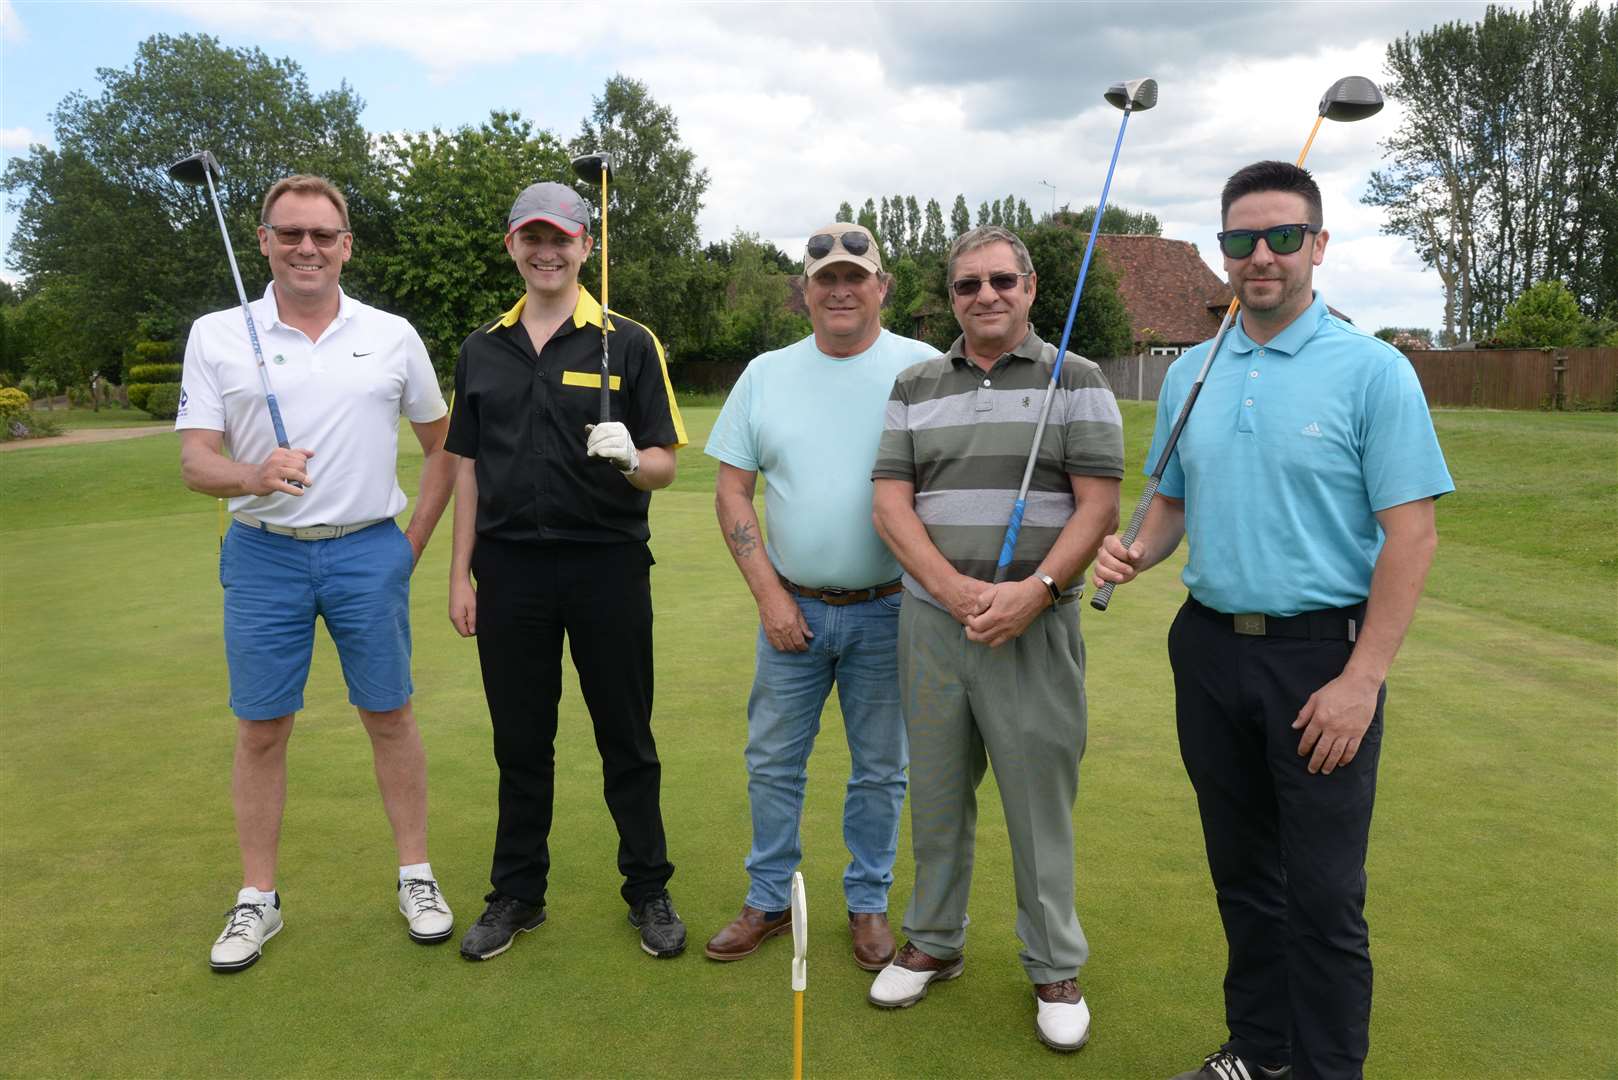 Mark Chippendale, Gareth, Anthony, Andrew and Christopher Shepphard during the charity golf match at The Ridge golf club